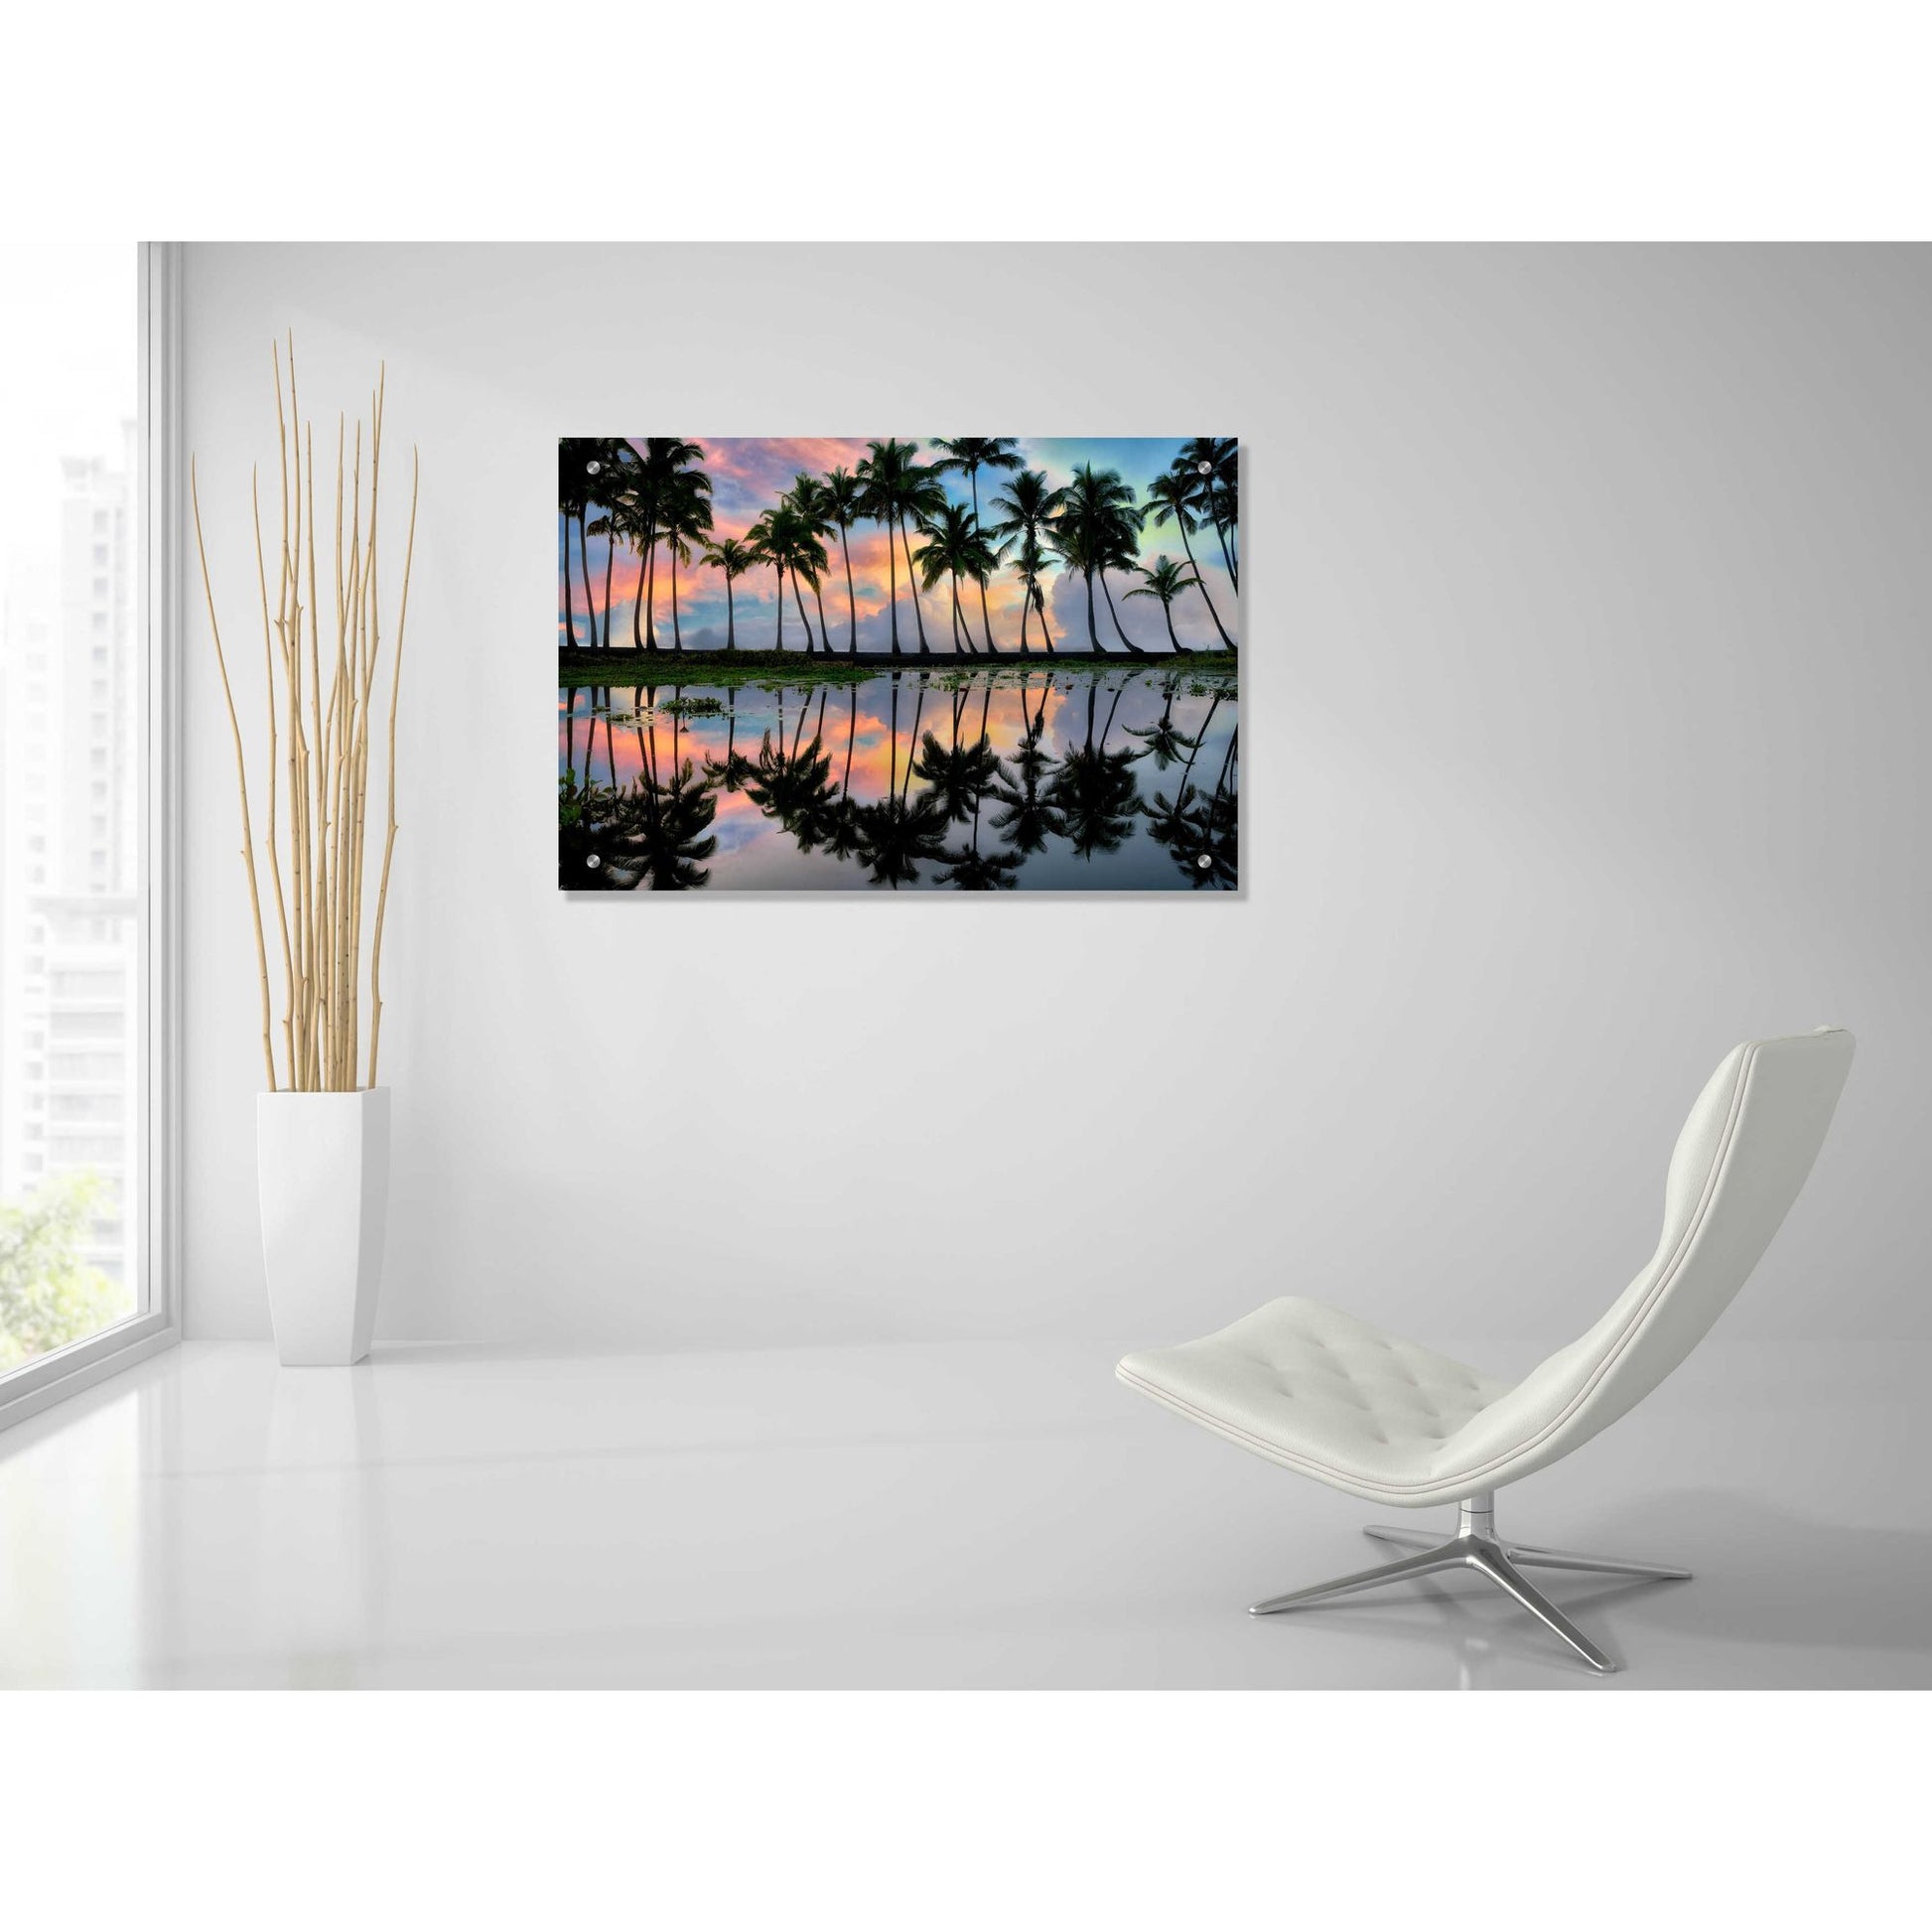 Epic Art 'Palm Reflections' by Dennis Frates, Acrylic Glass Wall Art,36x24